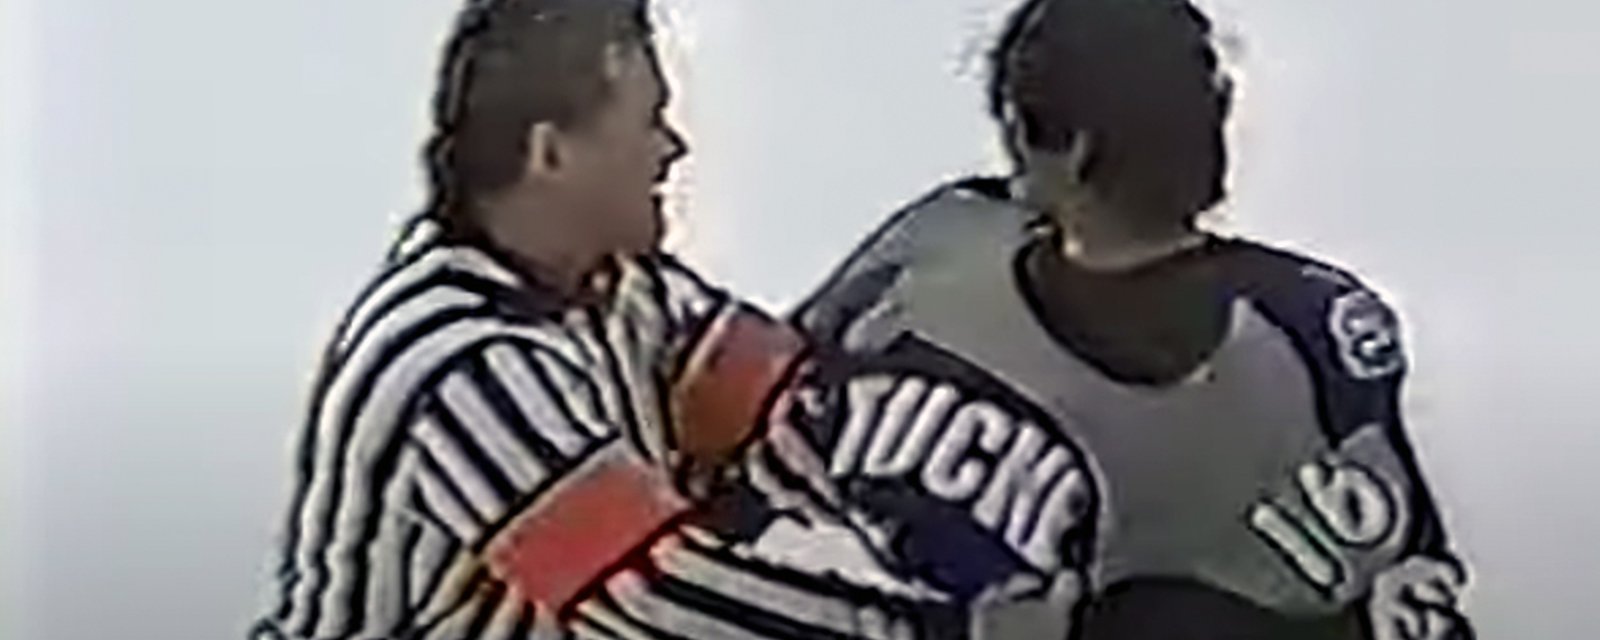 Throwback to Mick McGeough absolutely manhandling Darcy Tucker and tossing him into the penalty box